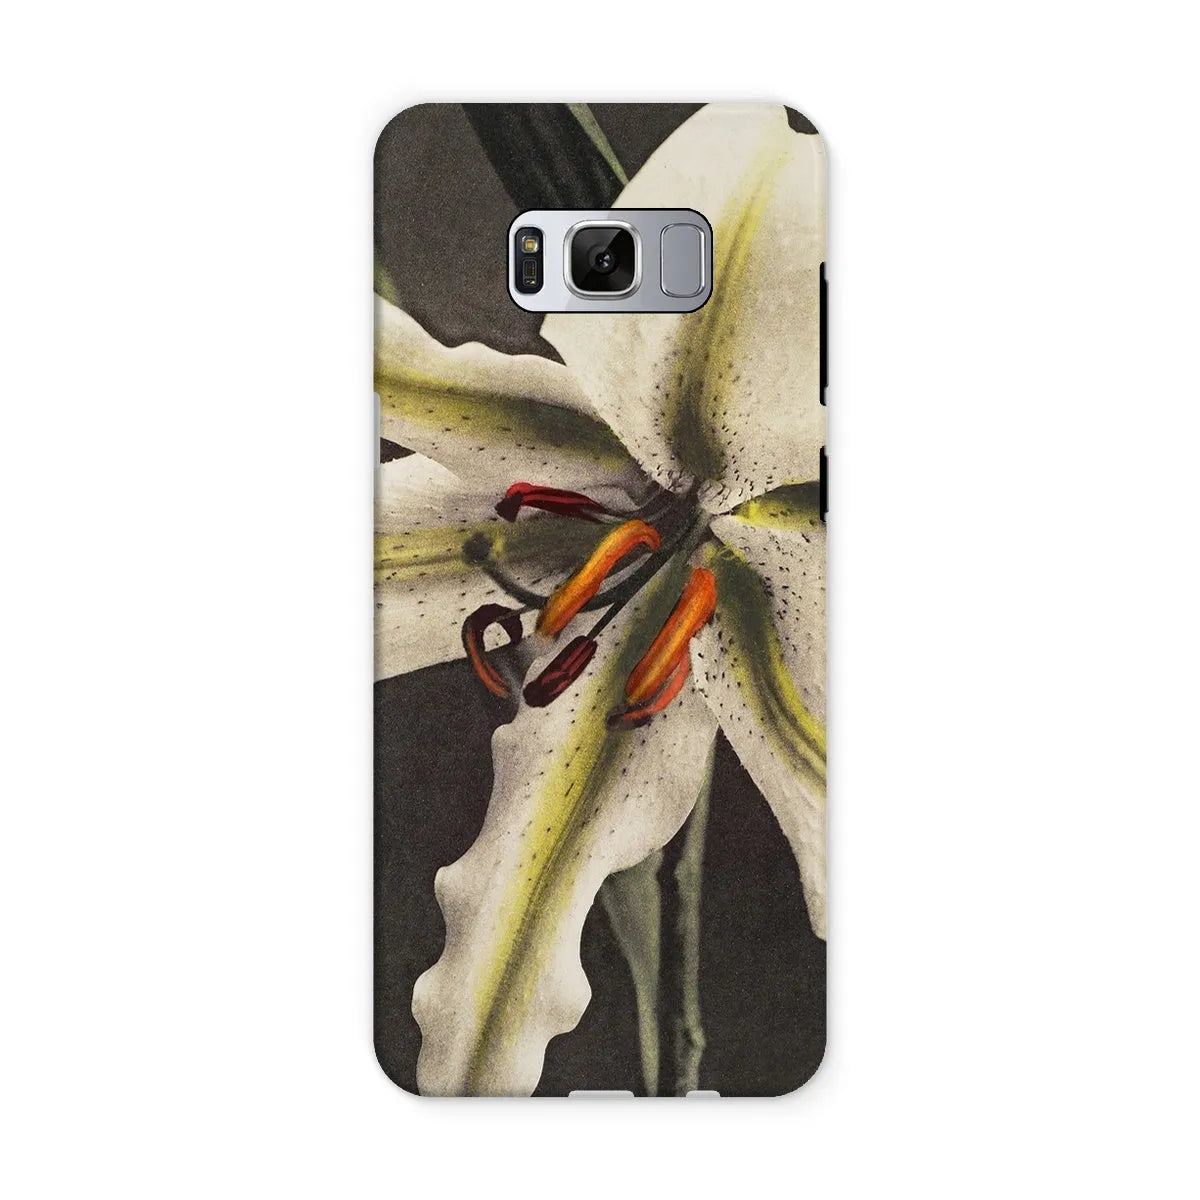 Lily By Kazumasa Ogawa Art Phone Case - Samsung Galaxy S8 / Matte - Mobile Phone Cases - Aesthetic Art